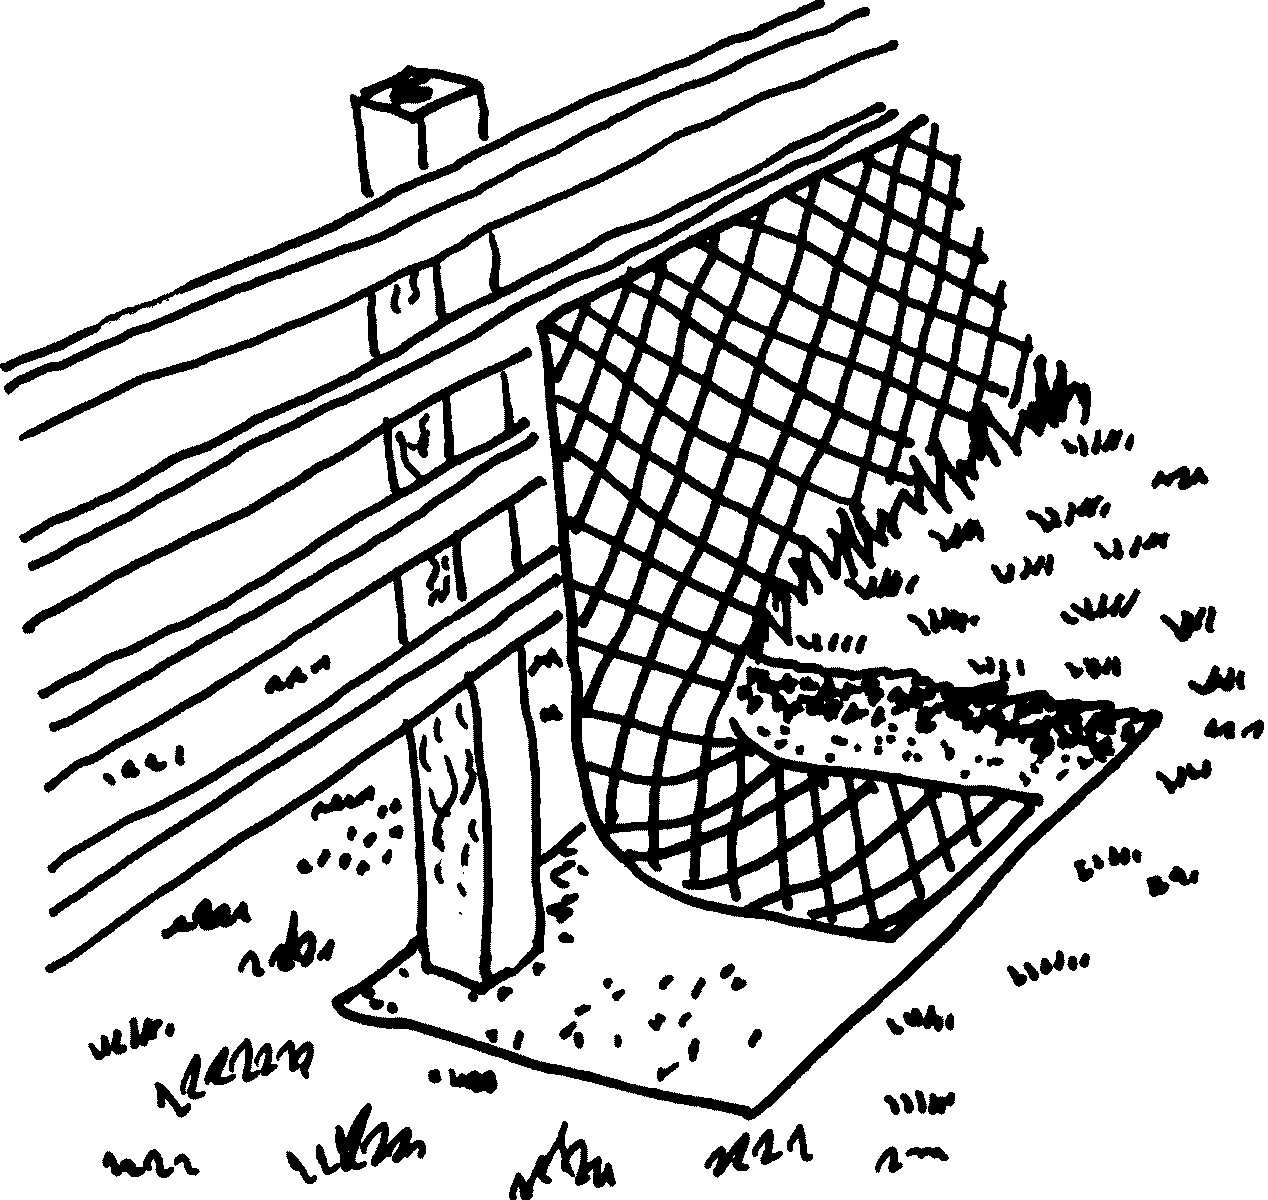 http://www.badgerland.co.uk/help/solutions/fencing.gif